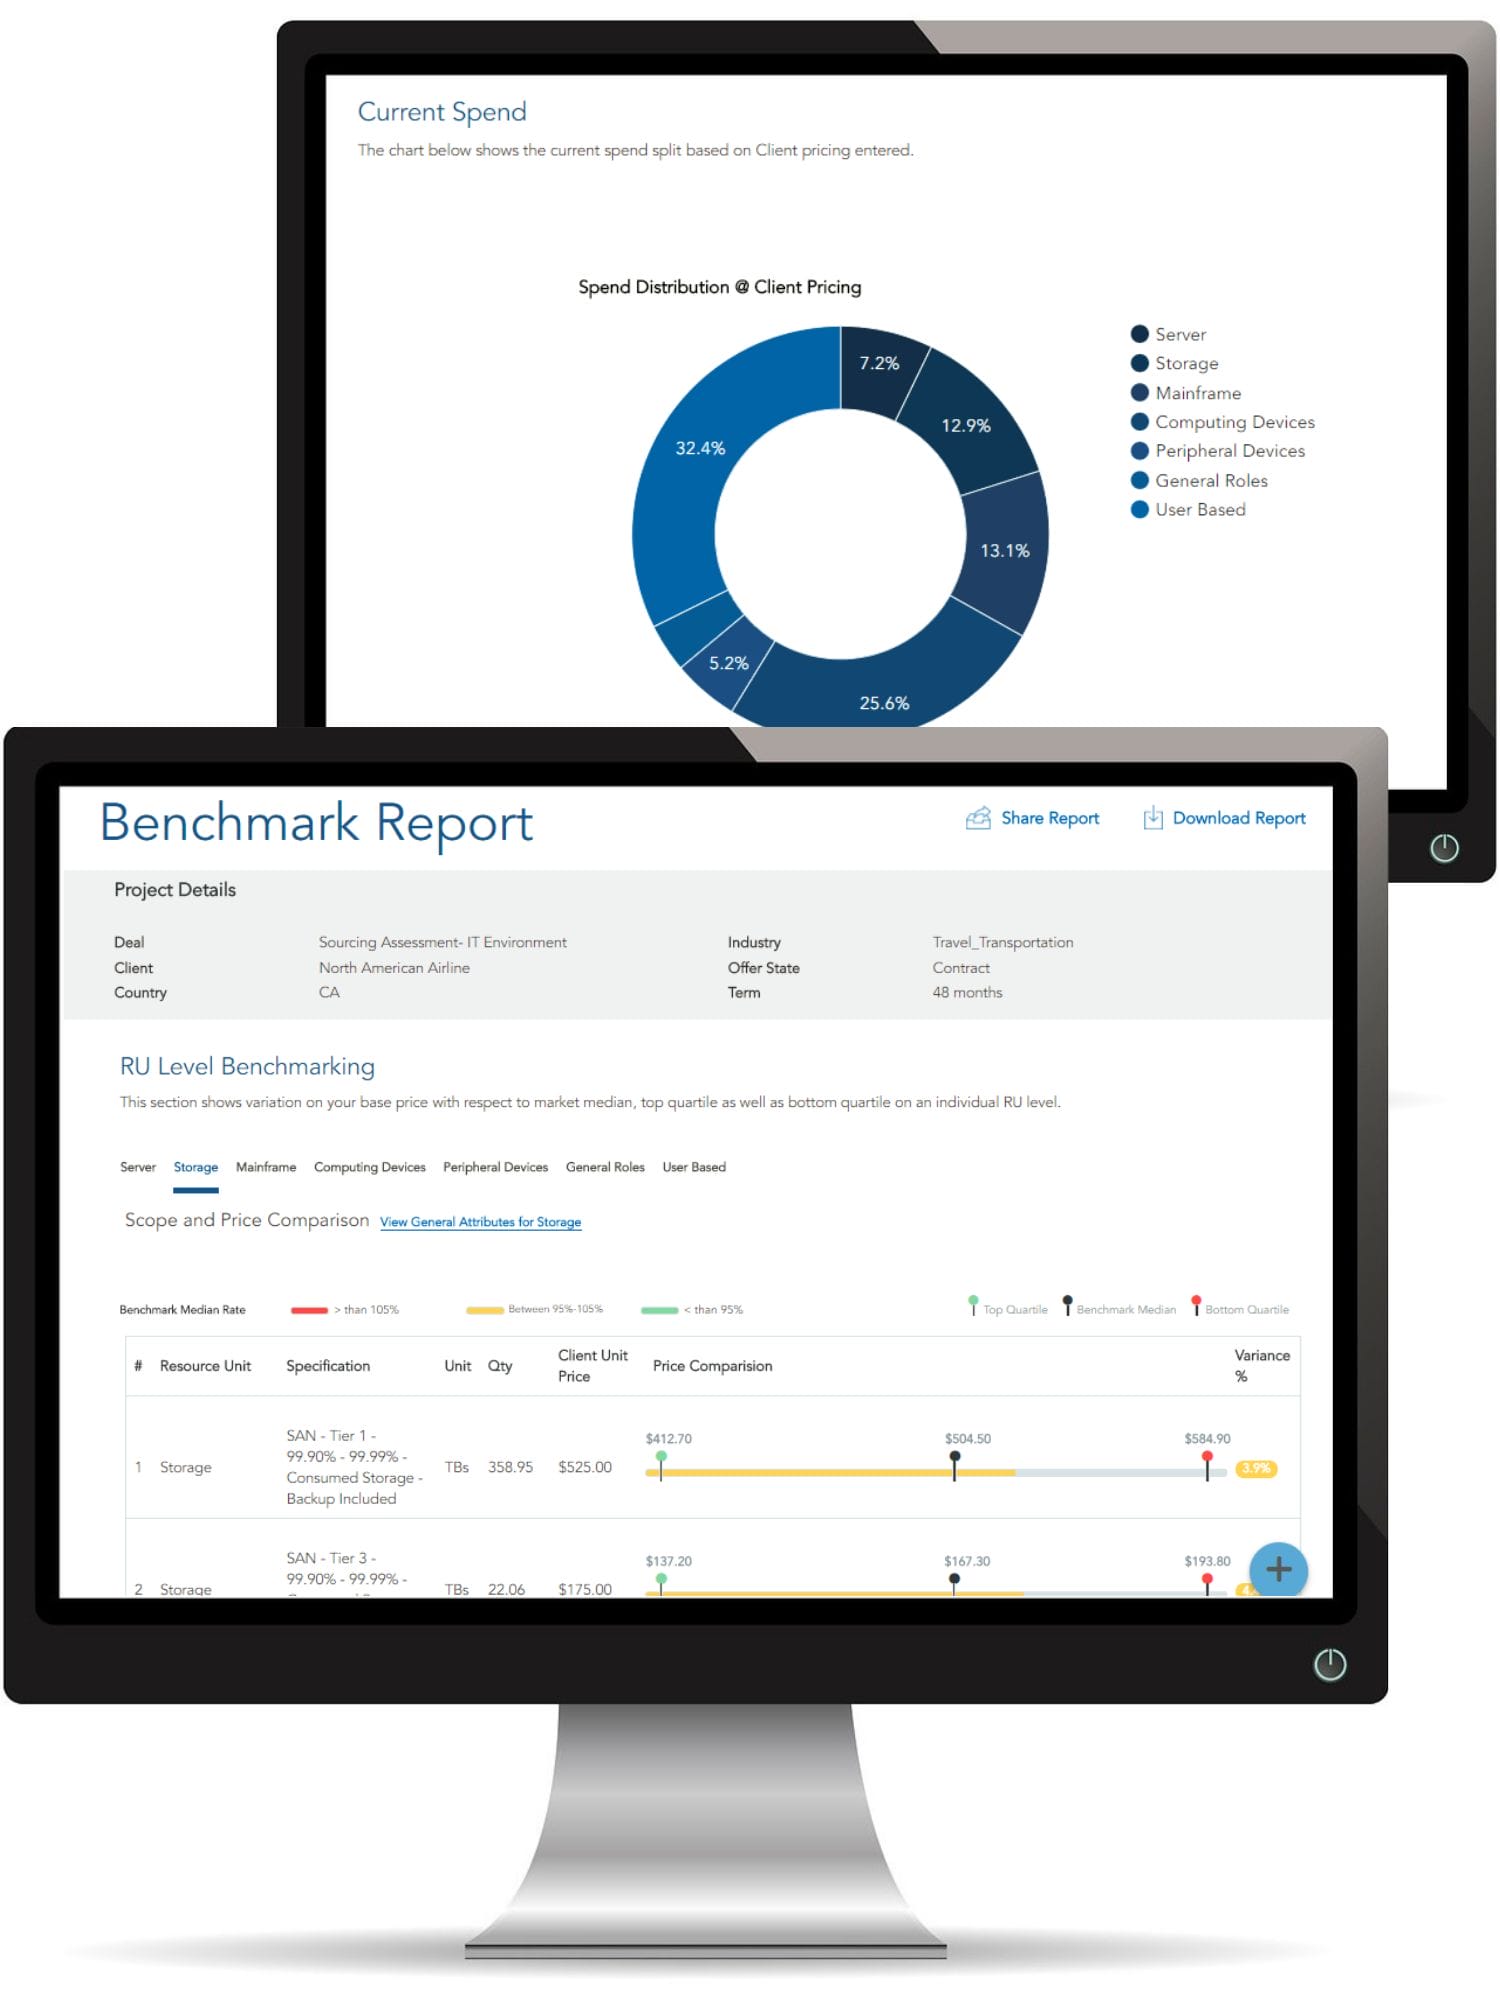 Copy of Benchmark Report and Current Spend combined 1 - AvaMark™ IT Price Benchmarking